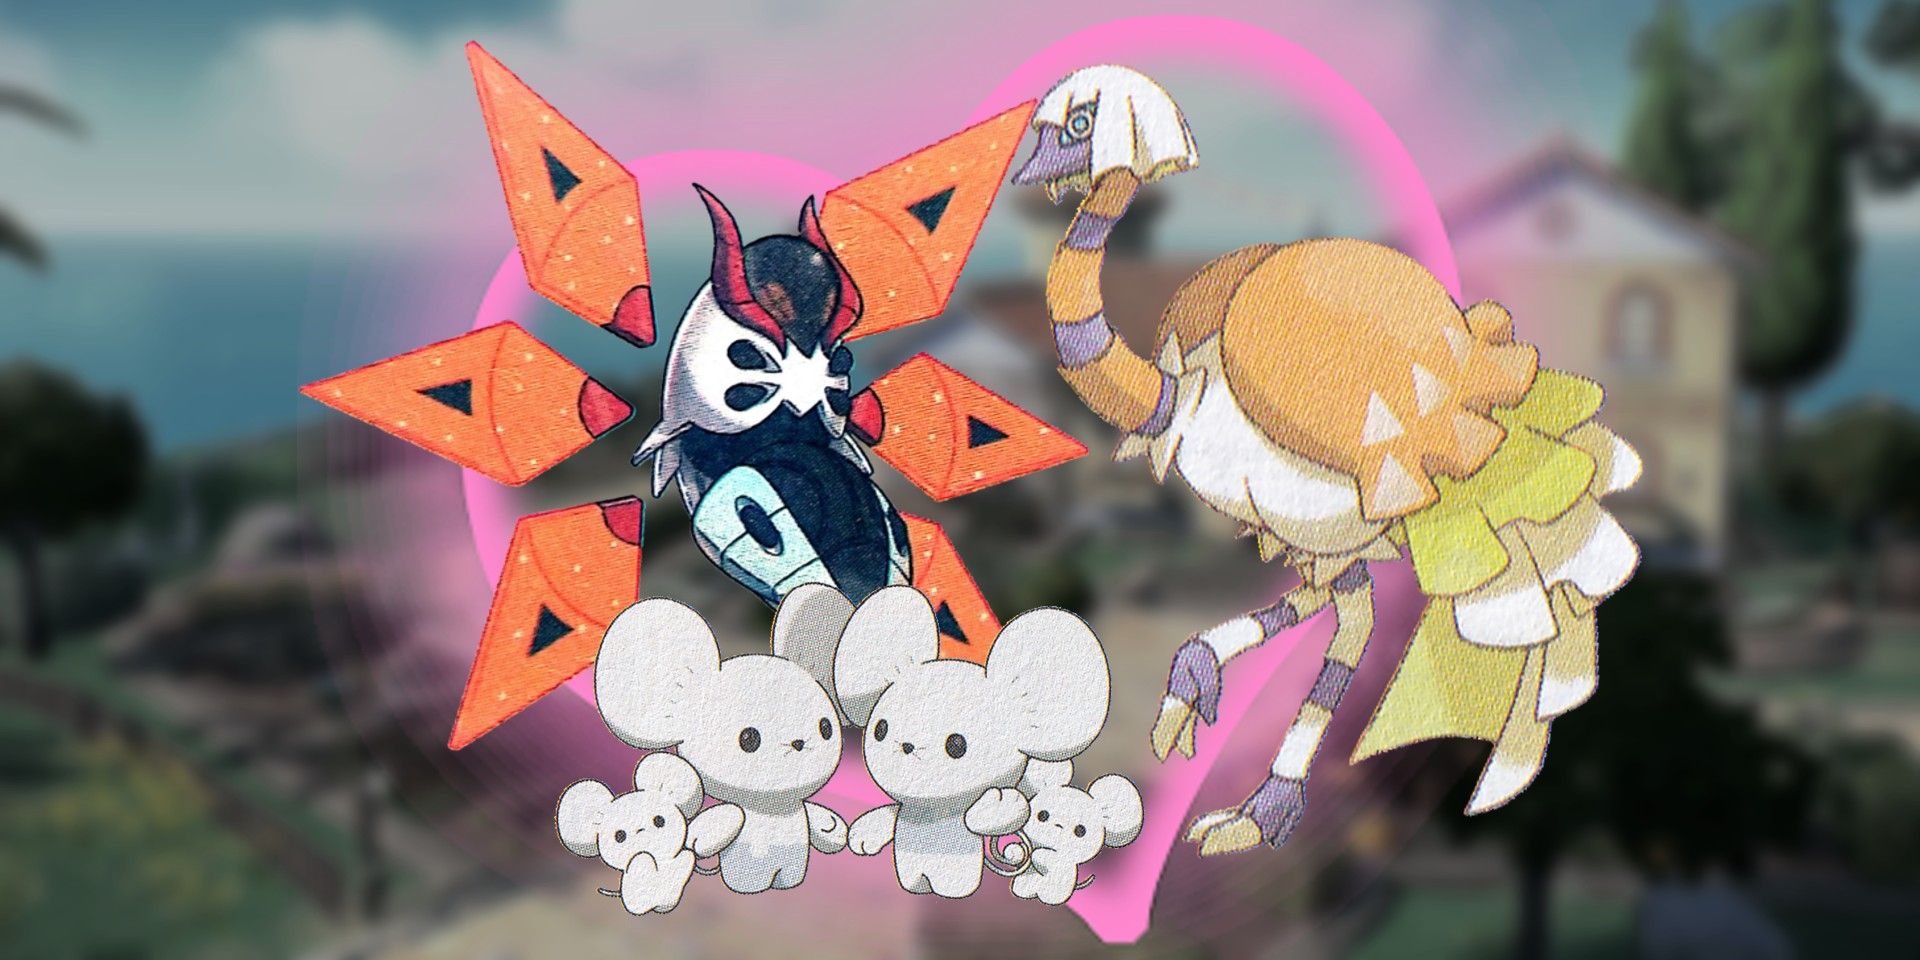 Pokemon Scarlet and Violet's Iron Moth to the left, Maushold below it, and Espathra to the right. Behind them is a pink heart and a blurred-out image of the Trainer's house in Paldea.